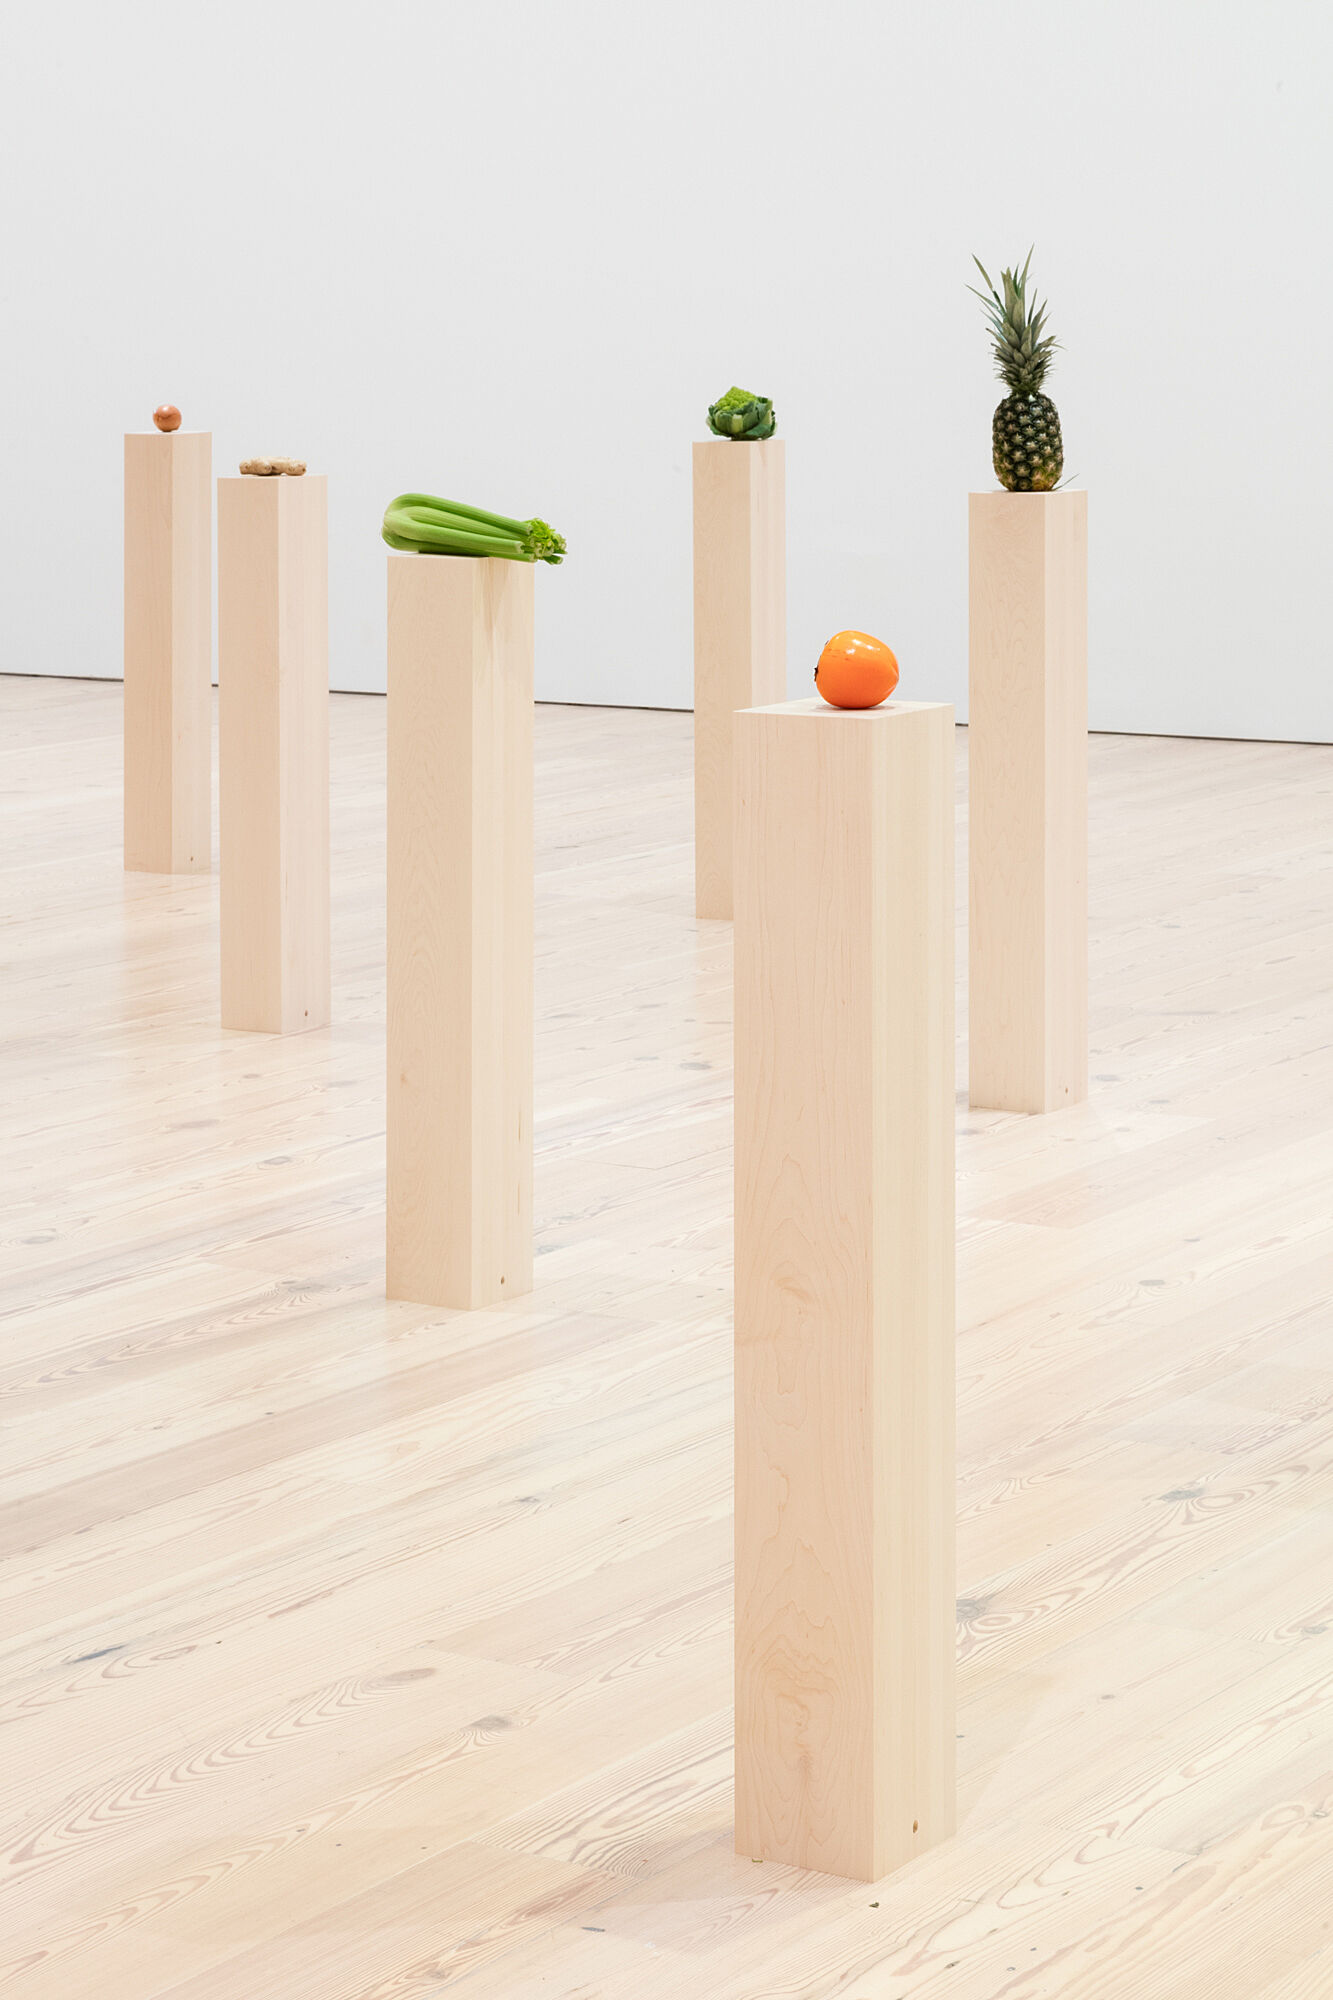 A photo of assorted vegetables and fruits on plinths.